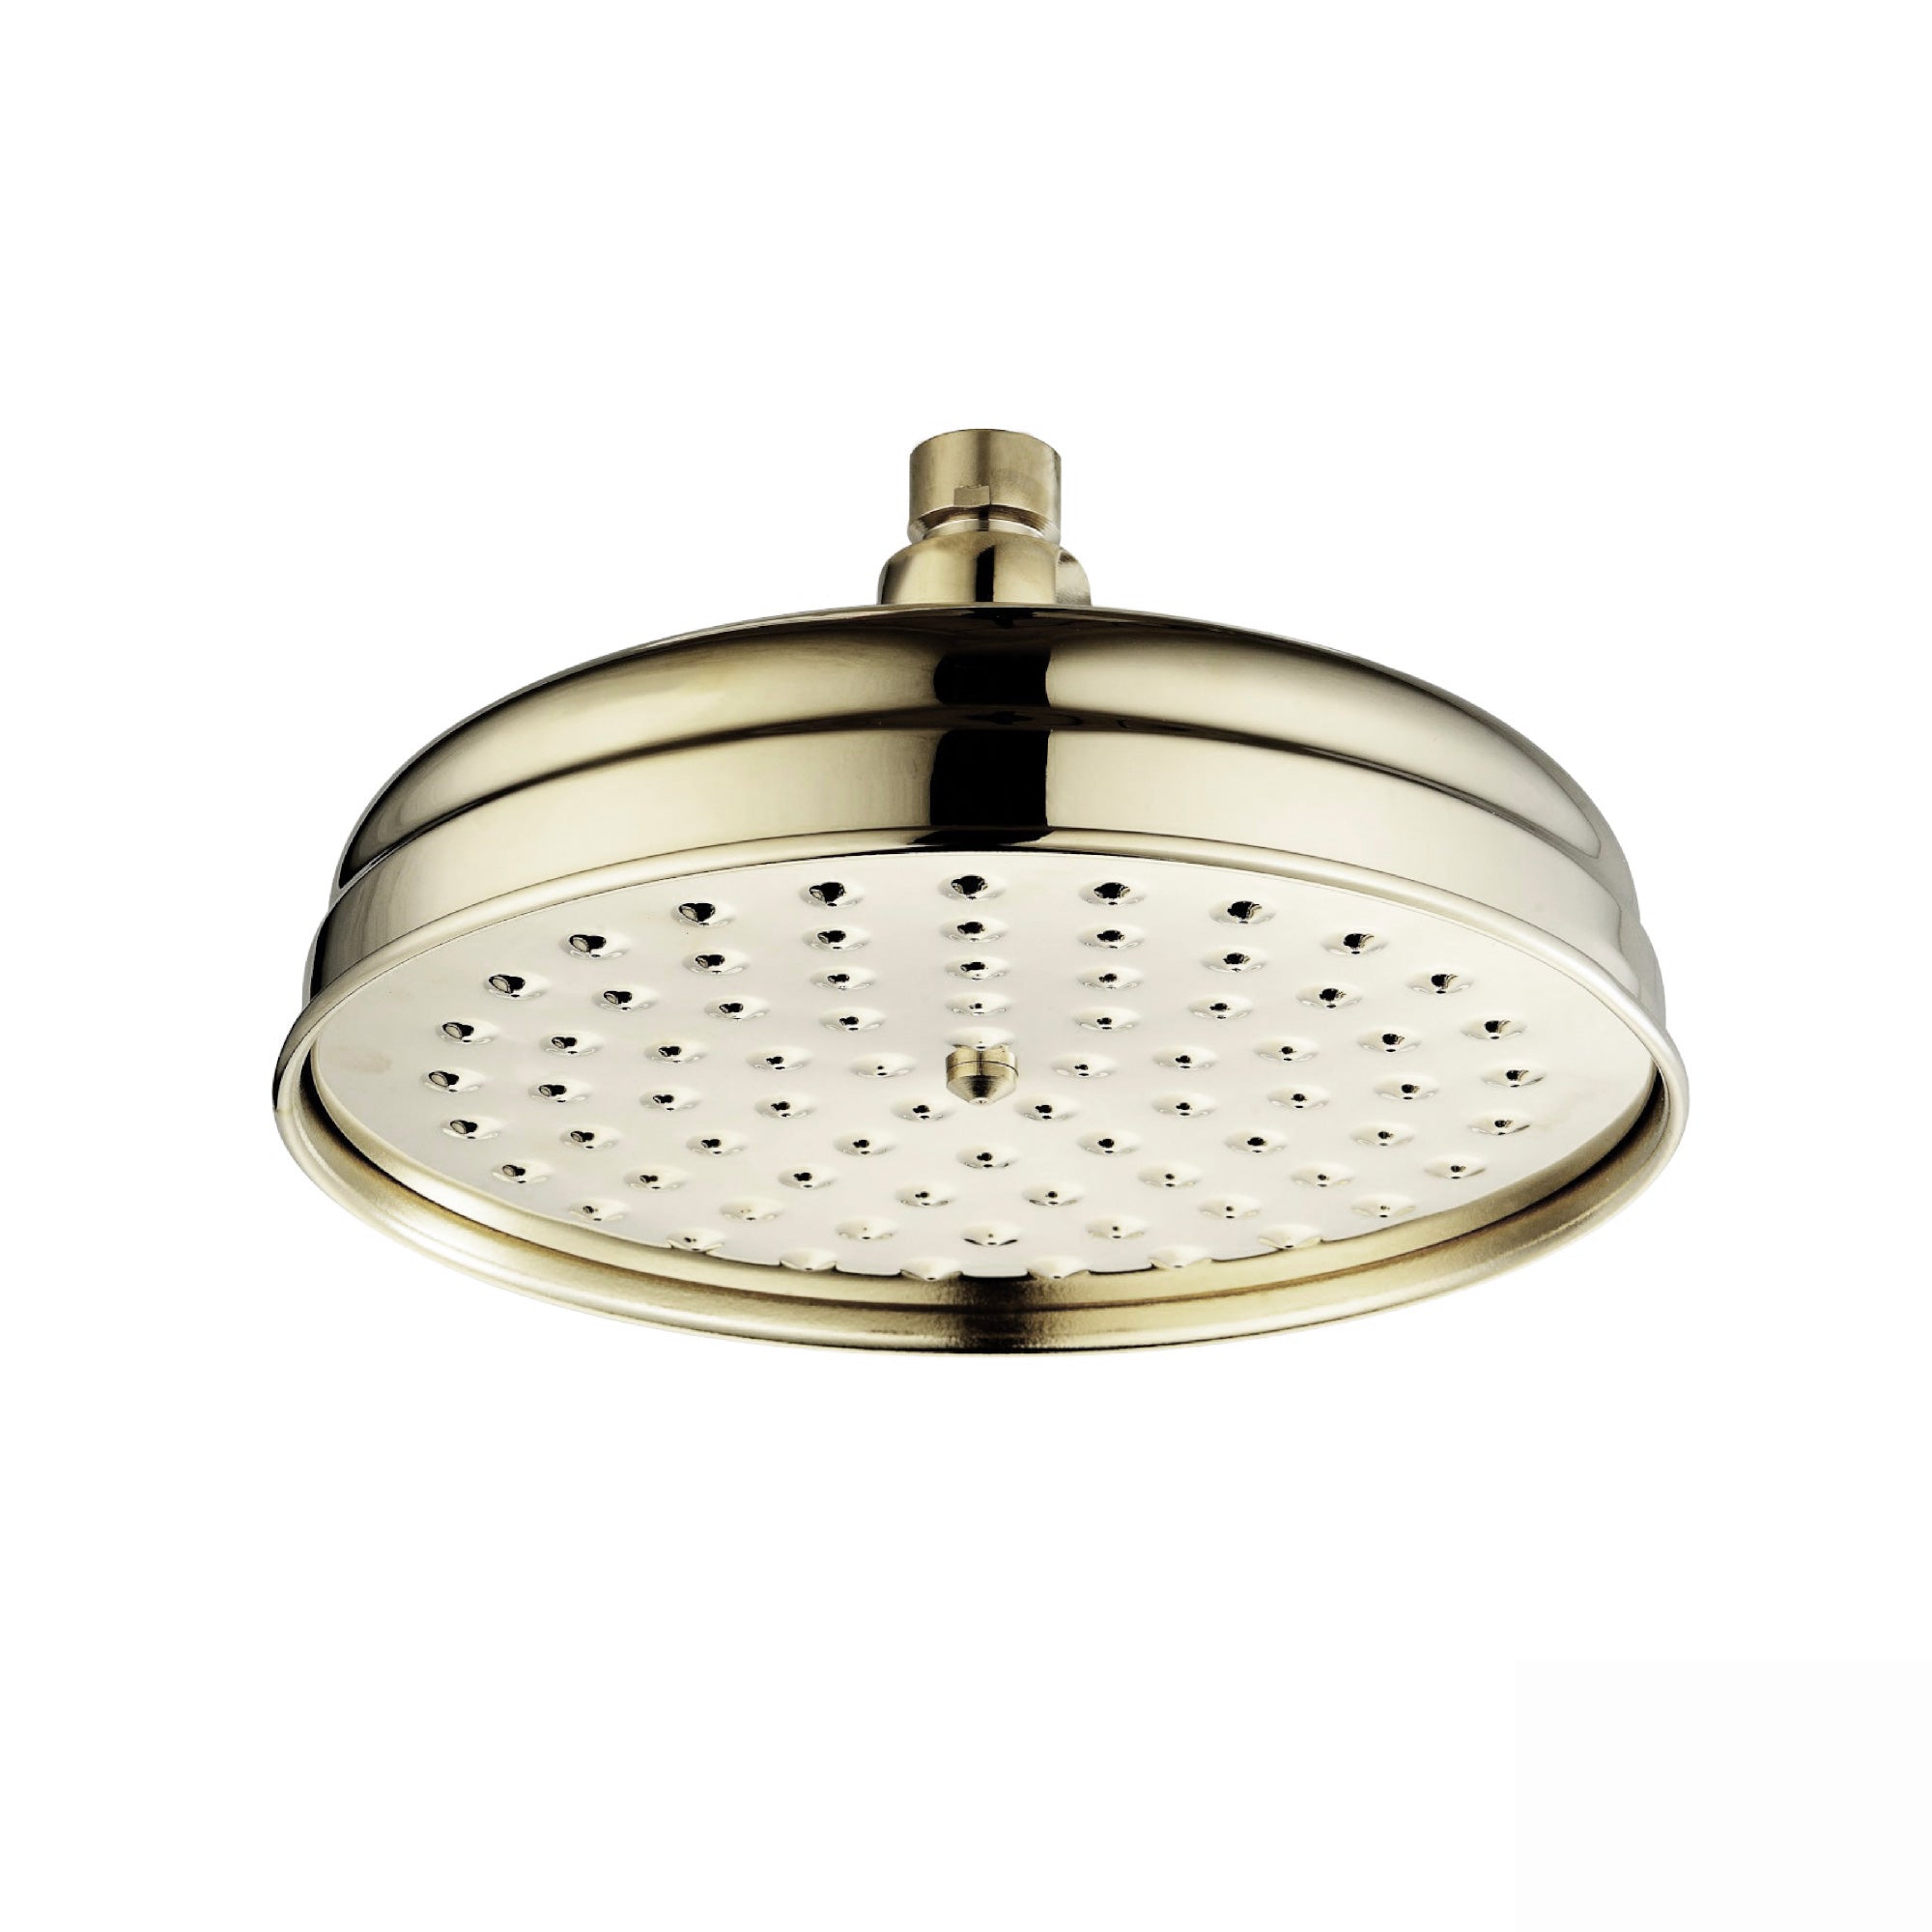 Traditional shower head apron rose brass 8" - English gold